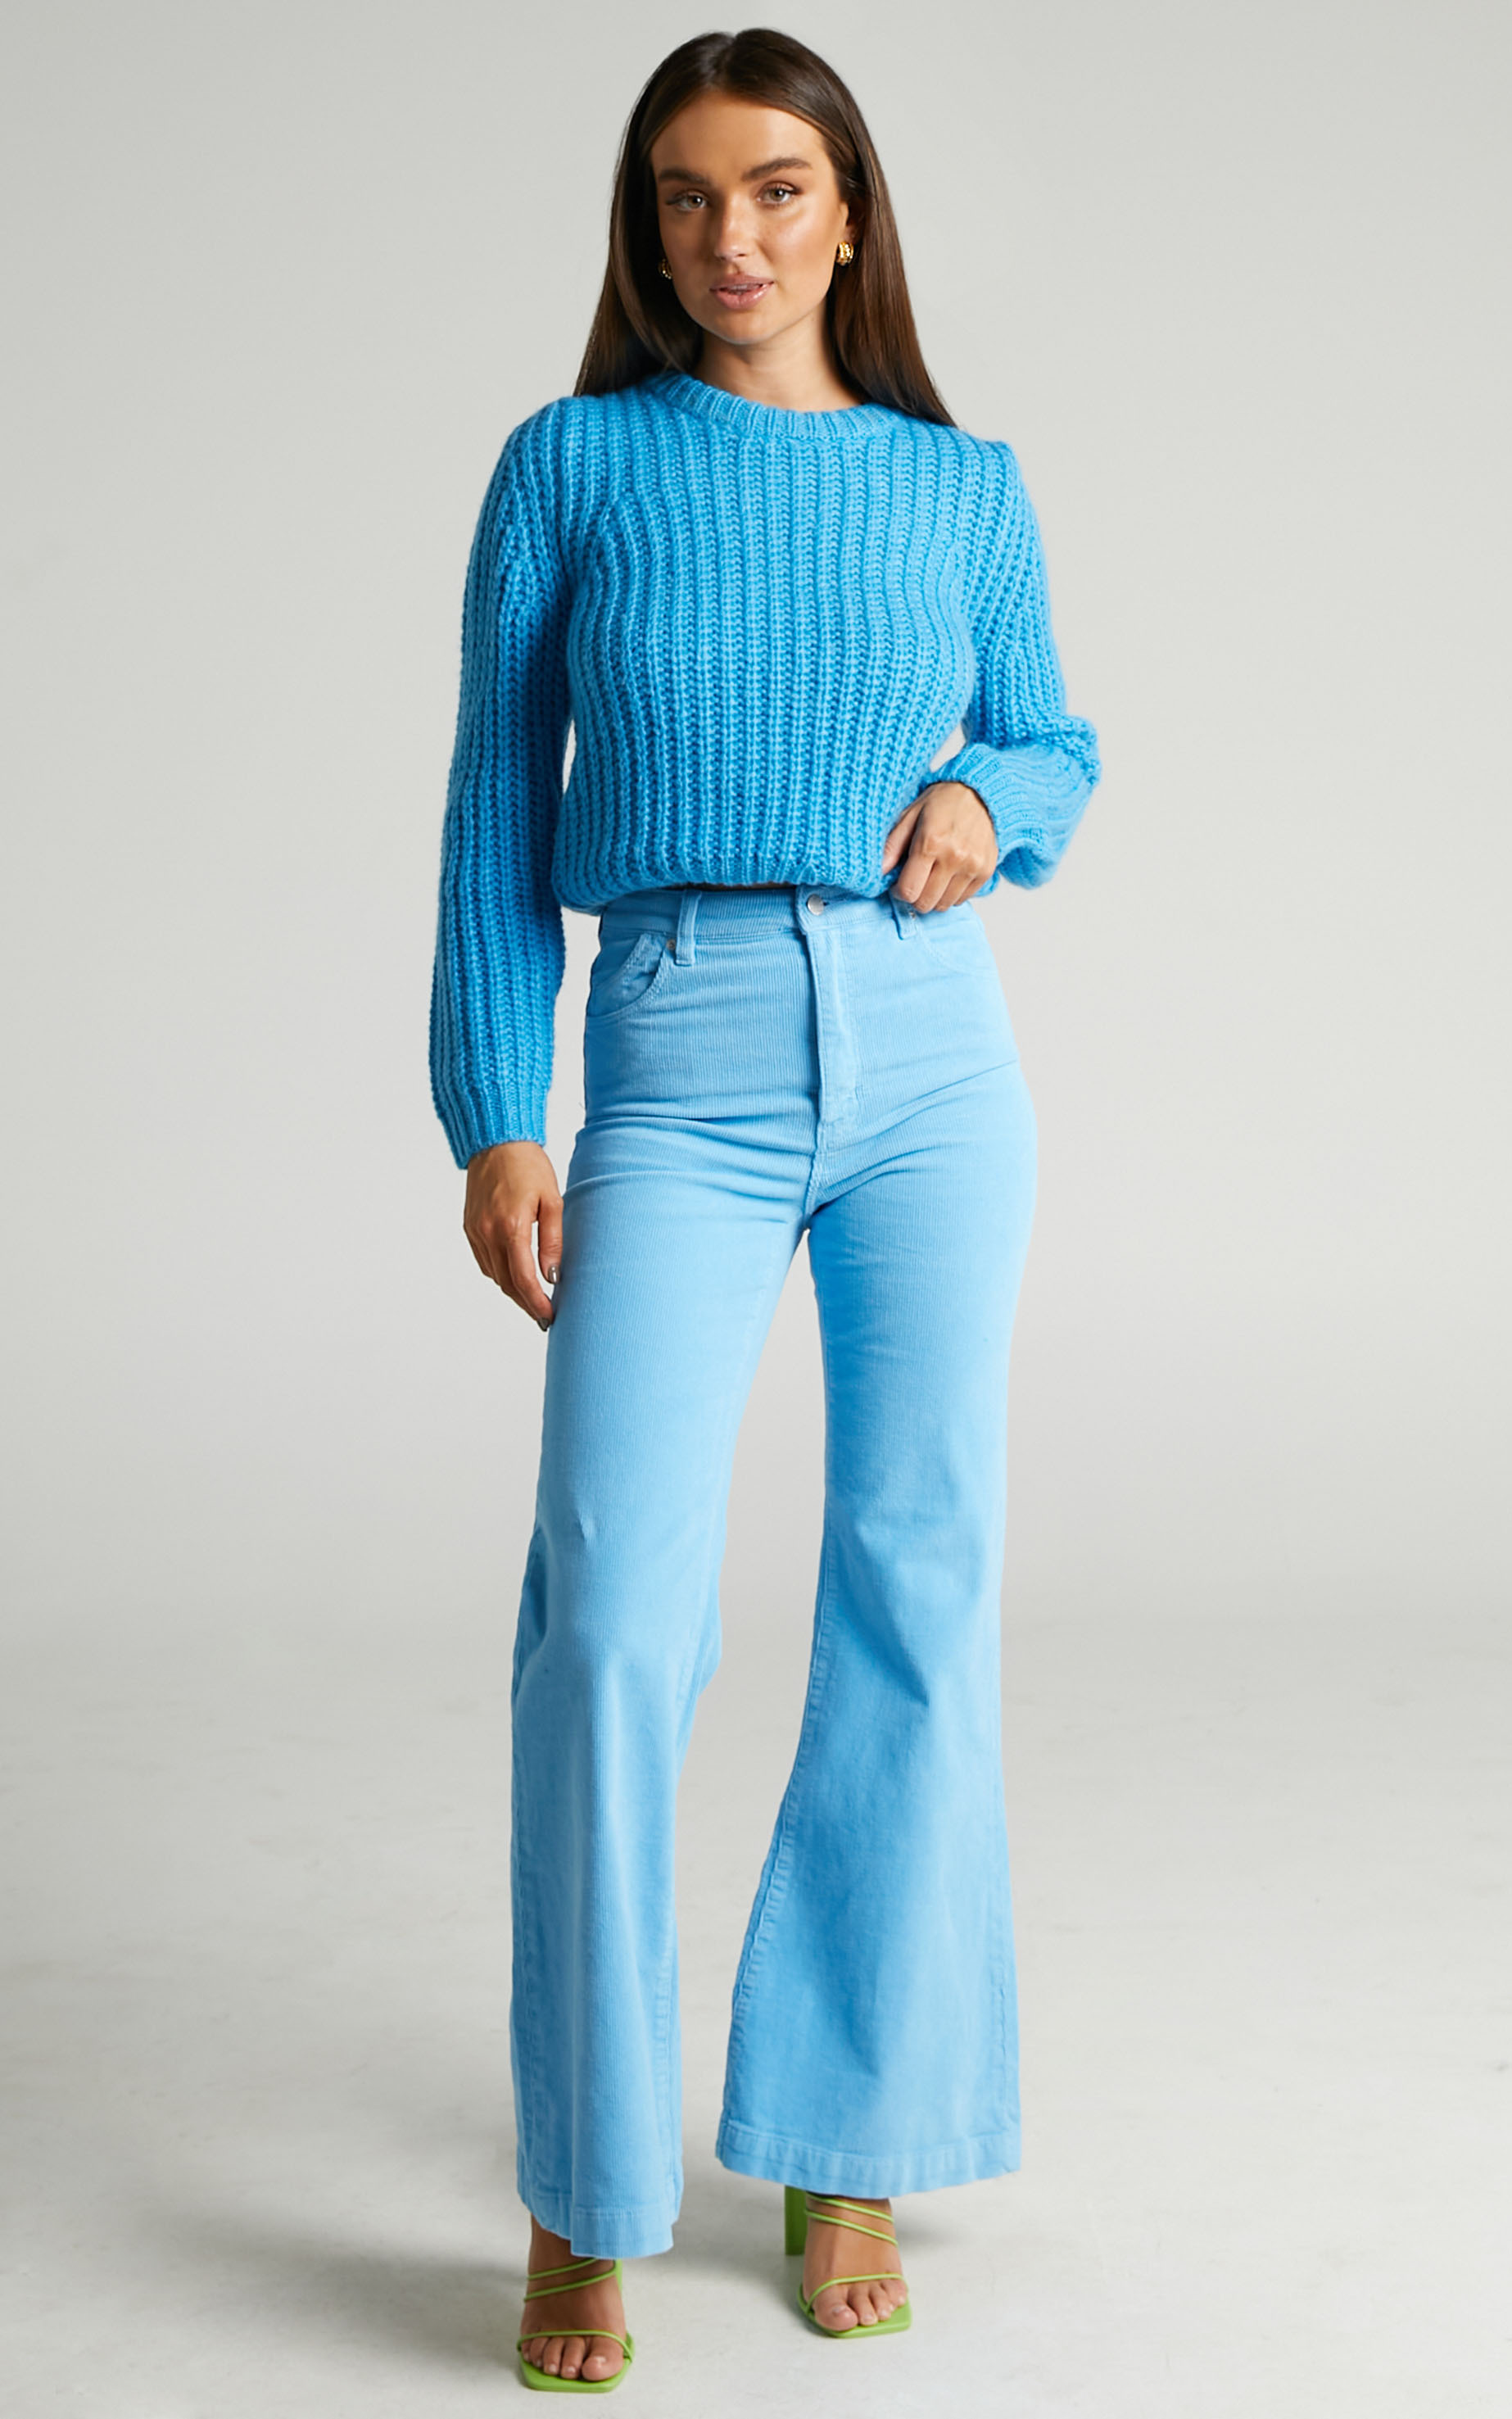 Rolla's - FLUFFY SAILOR SWEATER in Bluebird - 06, BLU1, hi-res image number null